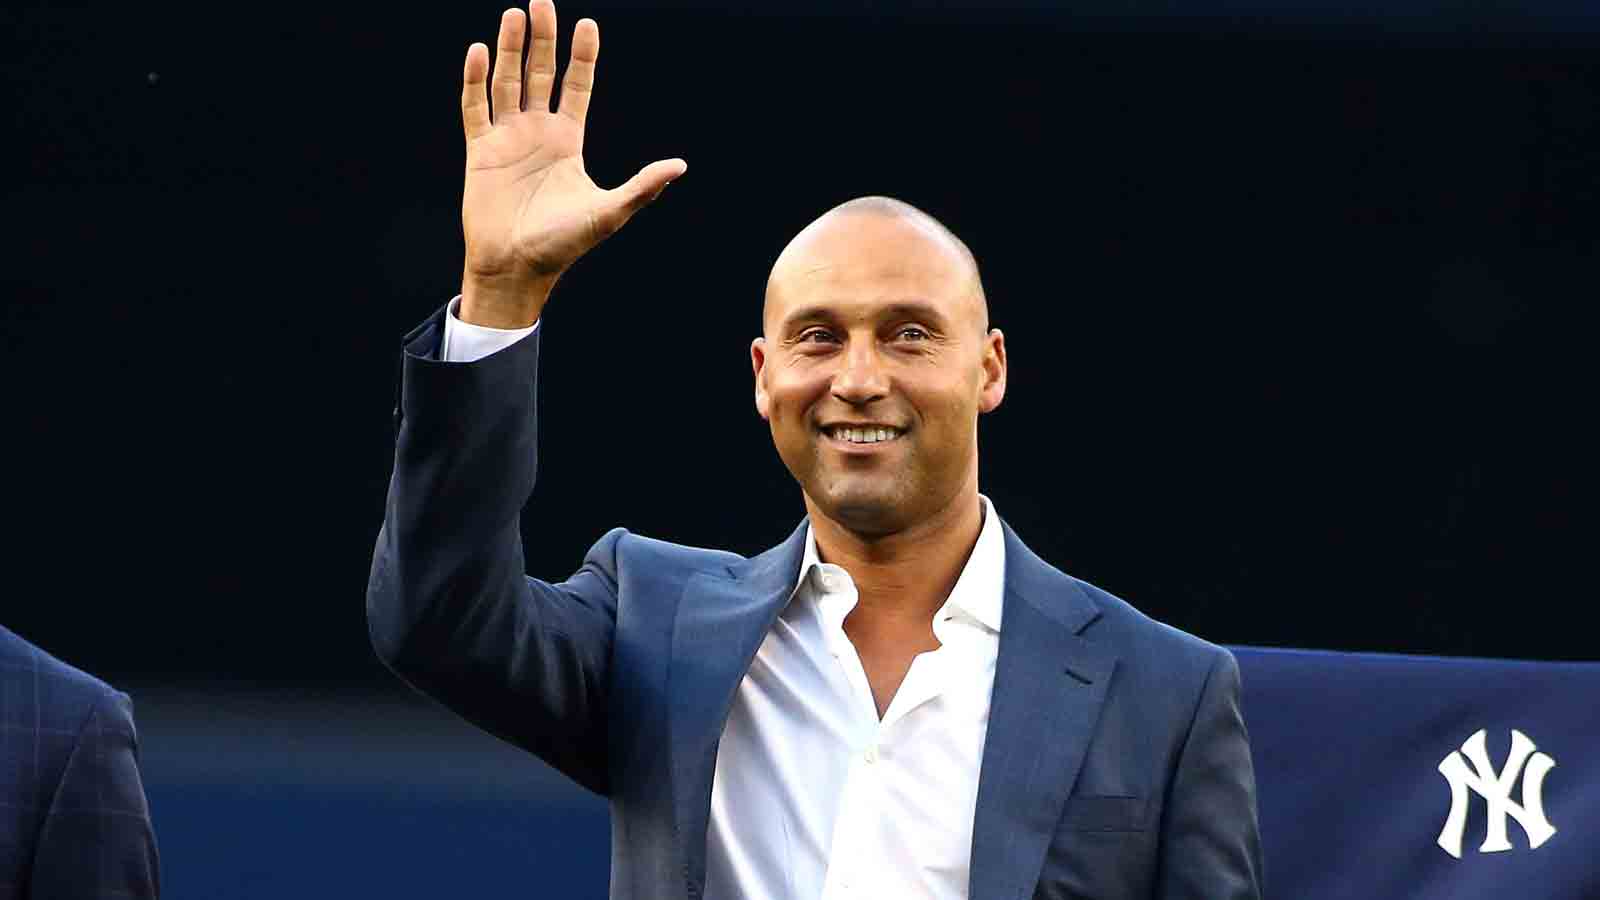 Yankees to honor Jeter for his induction into Hall of Fame